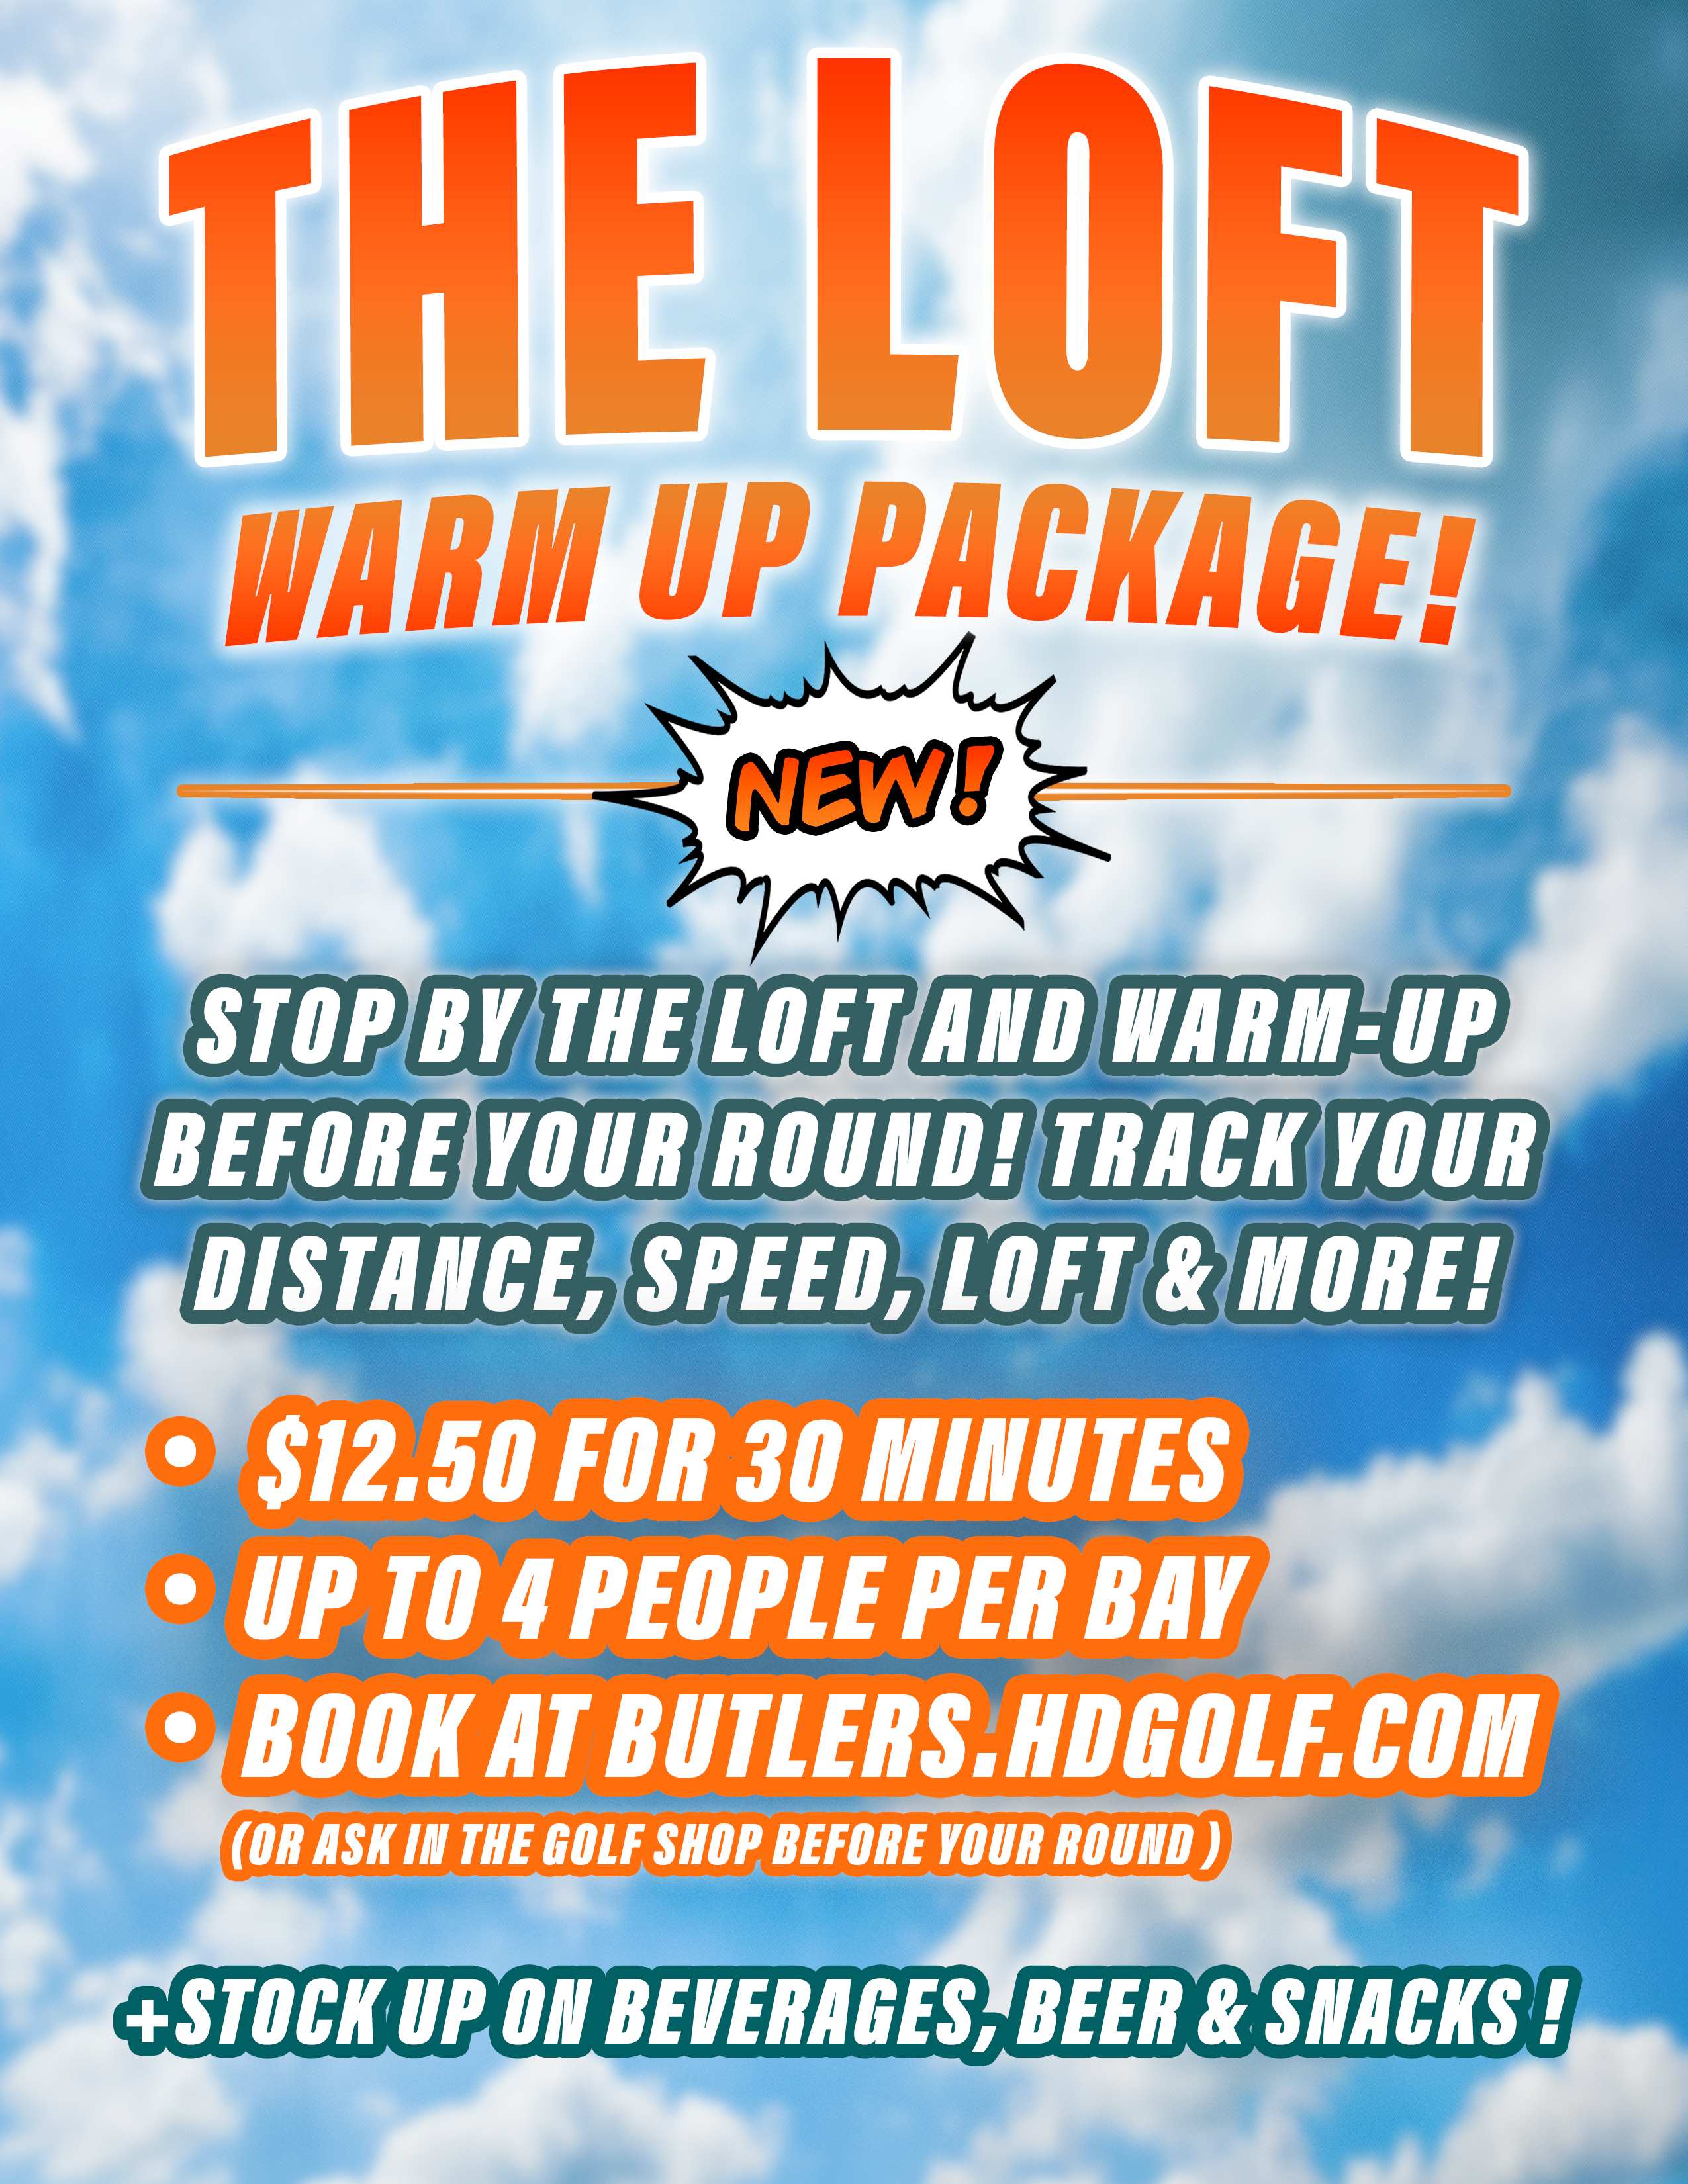 NEW! The Butler's Warm-Up Package!